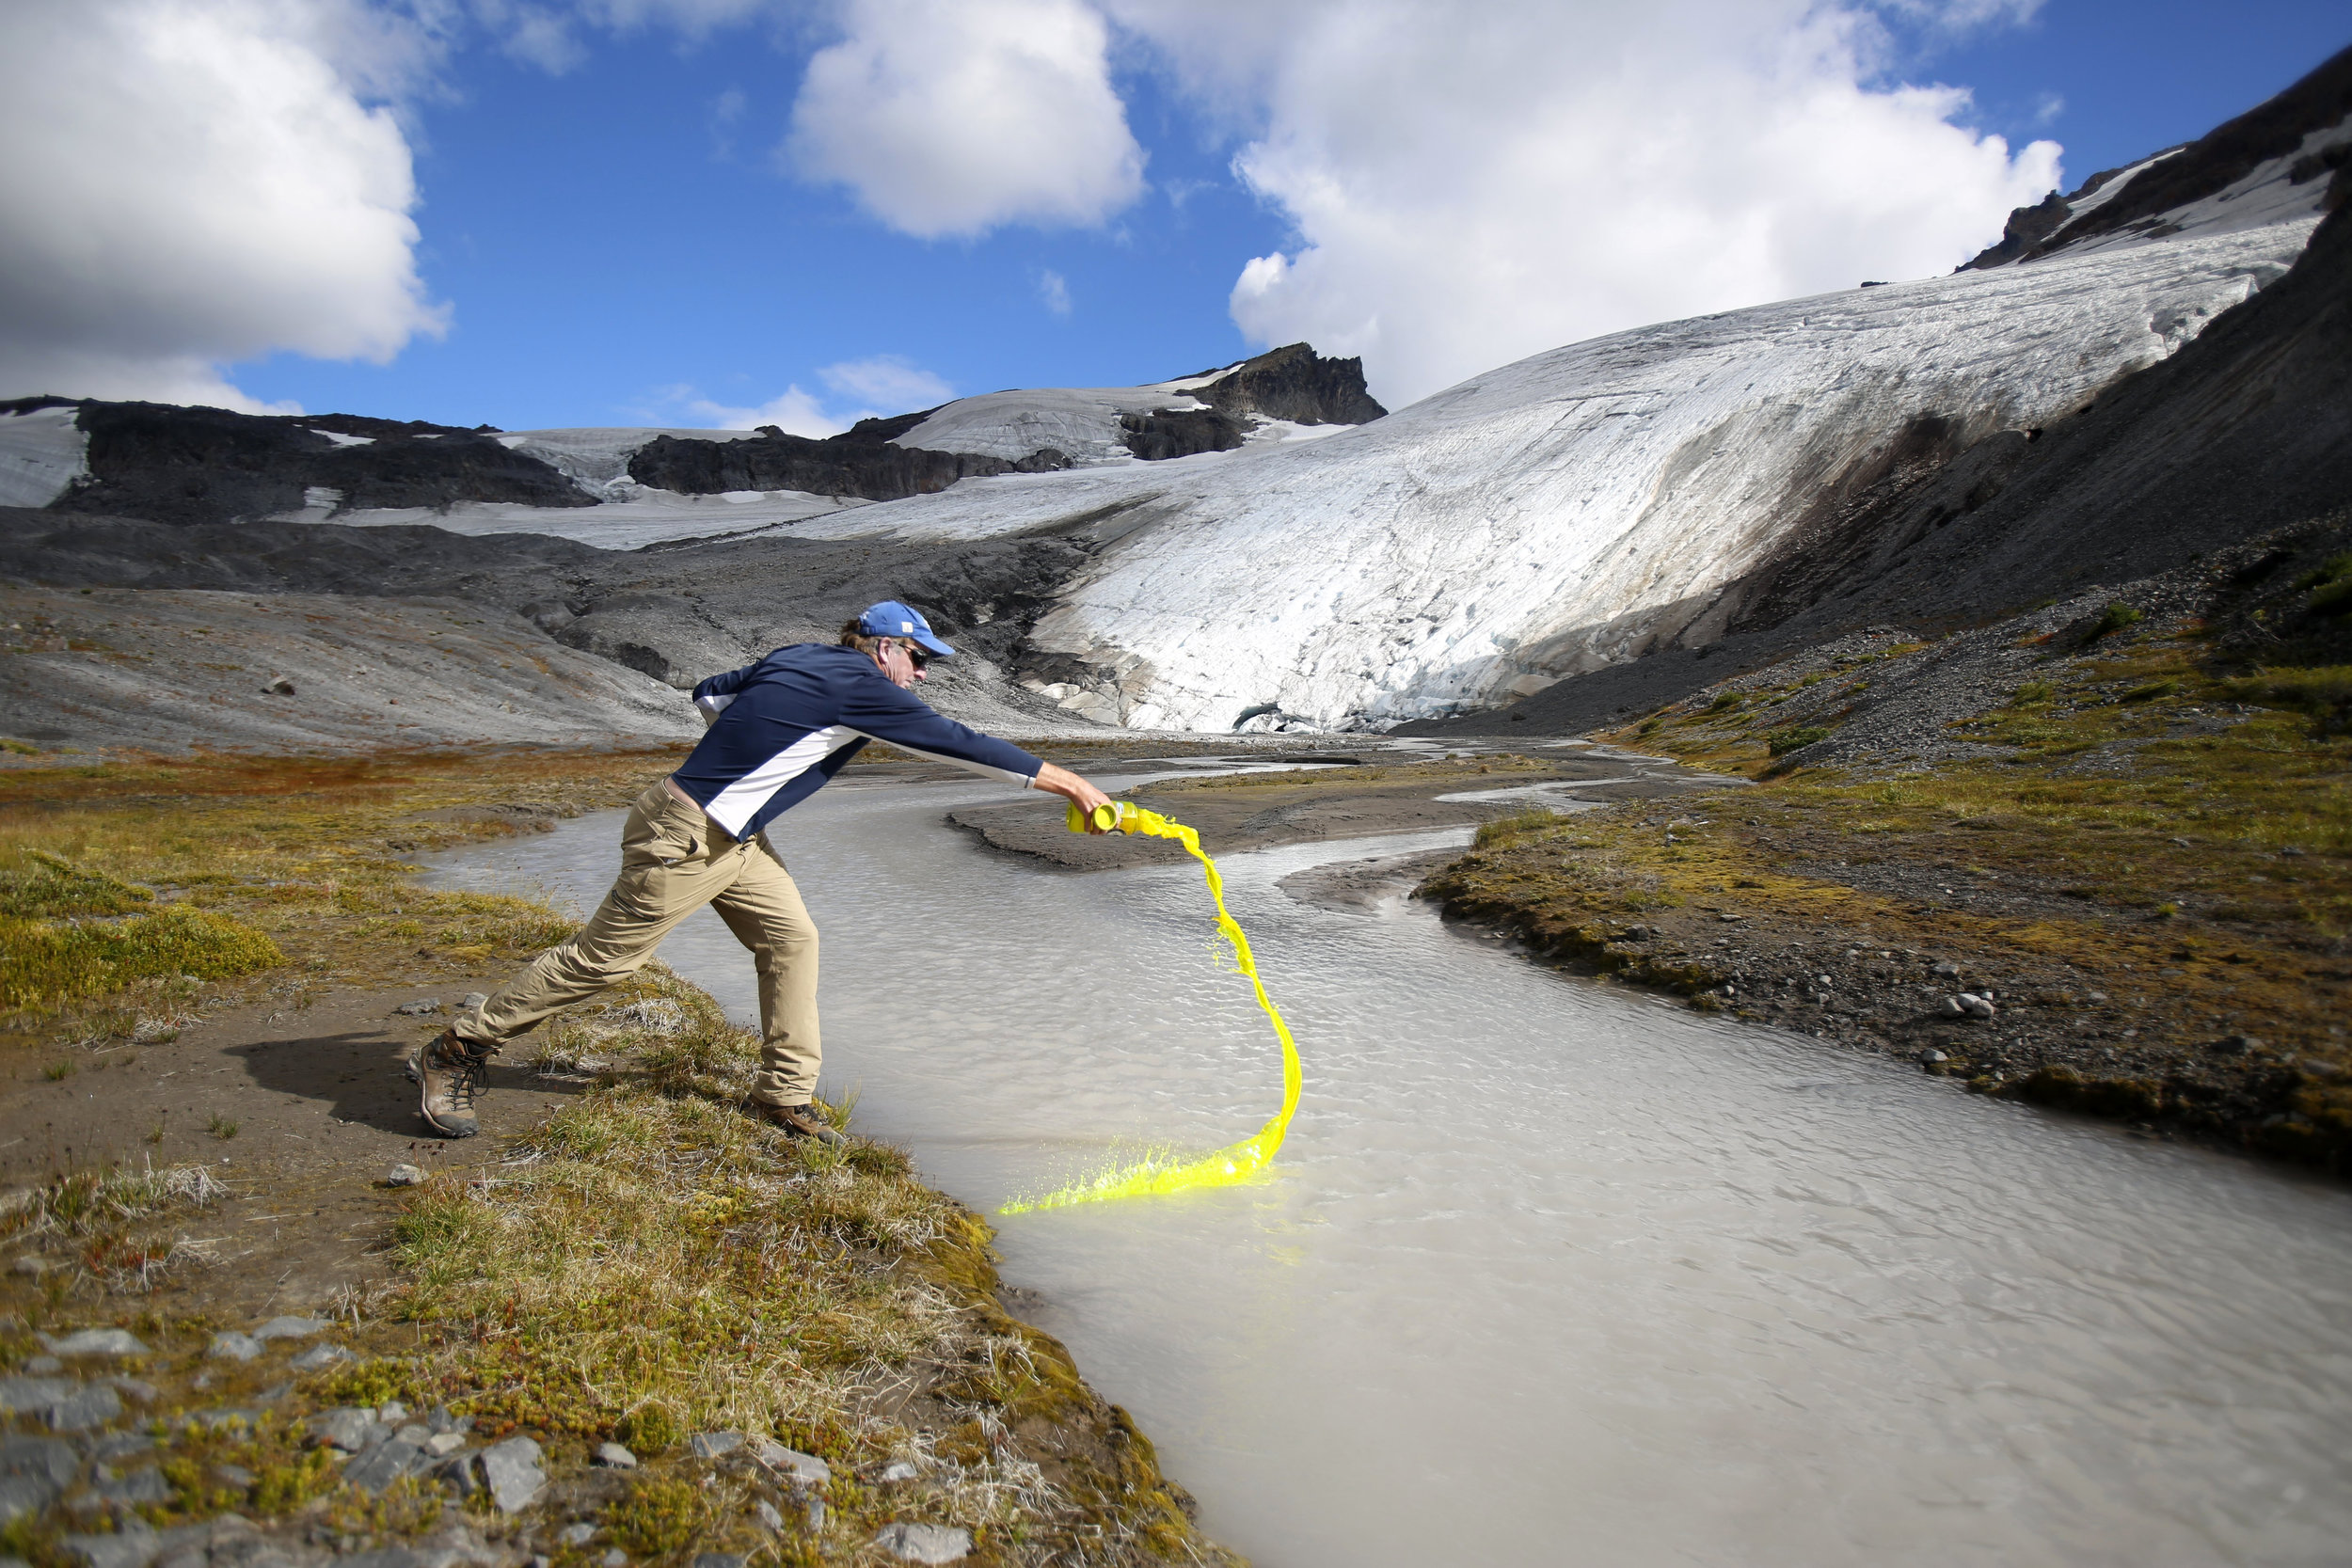  Glaciologist Mauri Pelto pours biodegradable dye into a runoff stream Friday, Aug. 7, 2015, in order to measure the volume of runoff on Sholes Glacier, on the northeast slope of Mount Baker. The glacier has receded more than 90 meters, or nearly 300